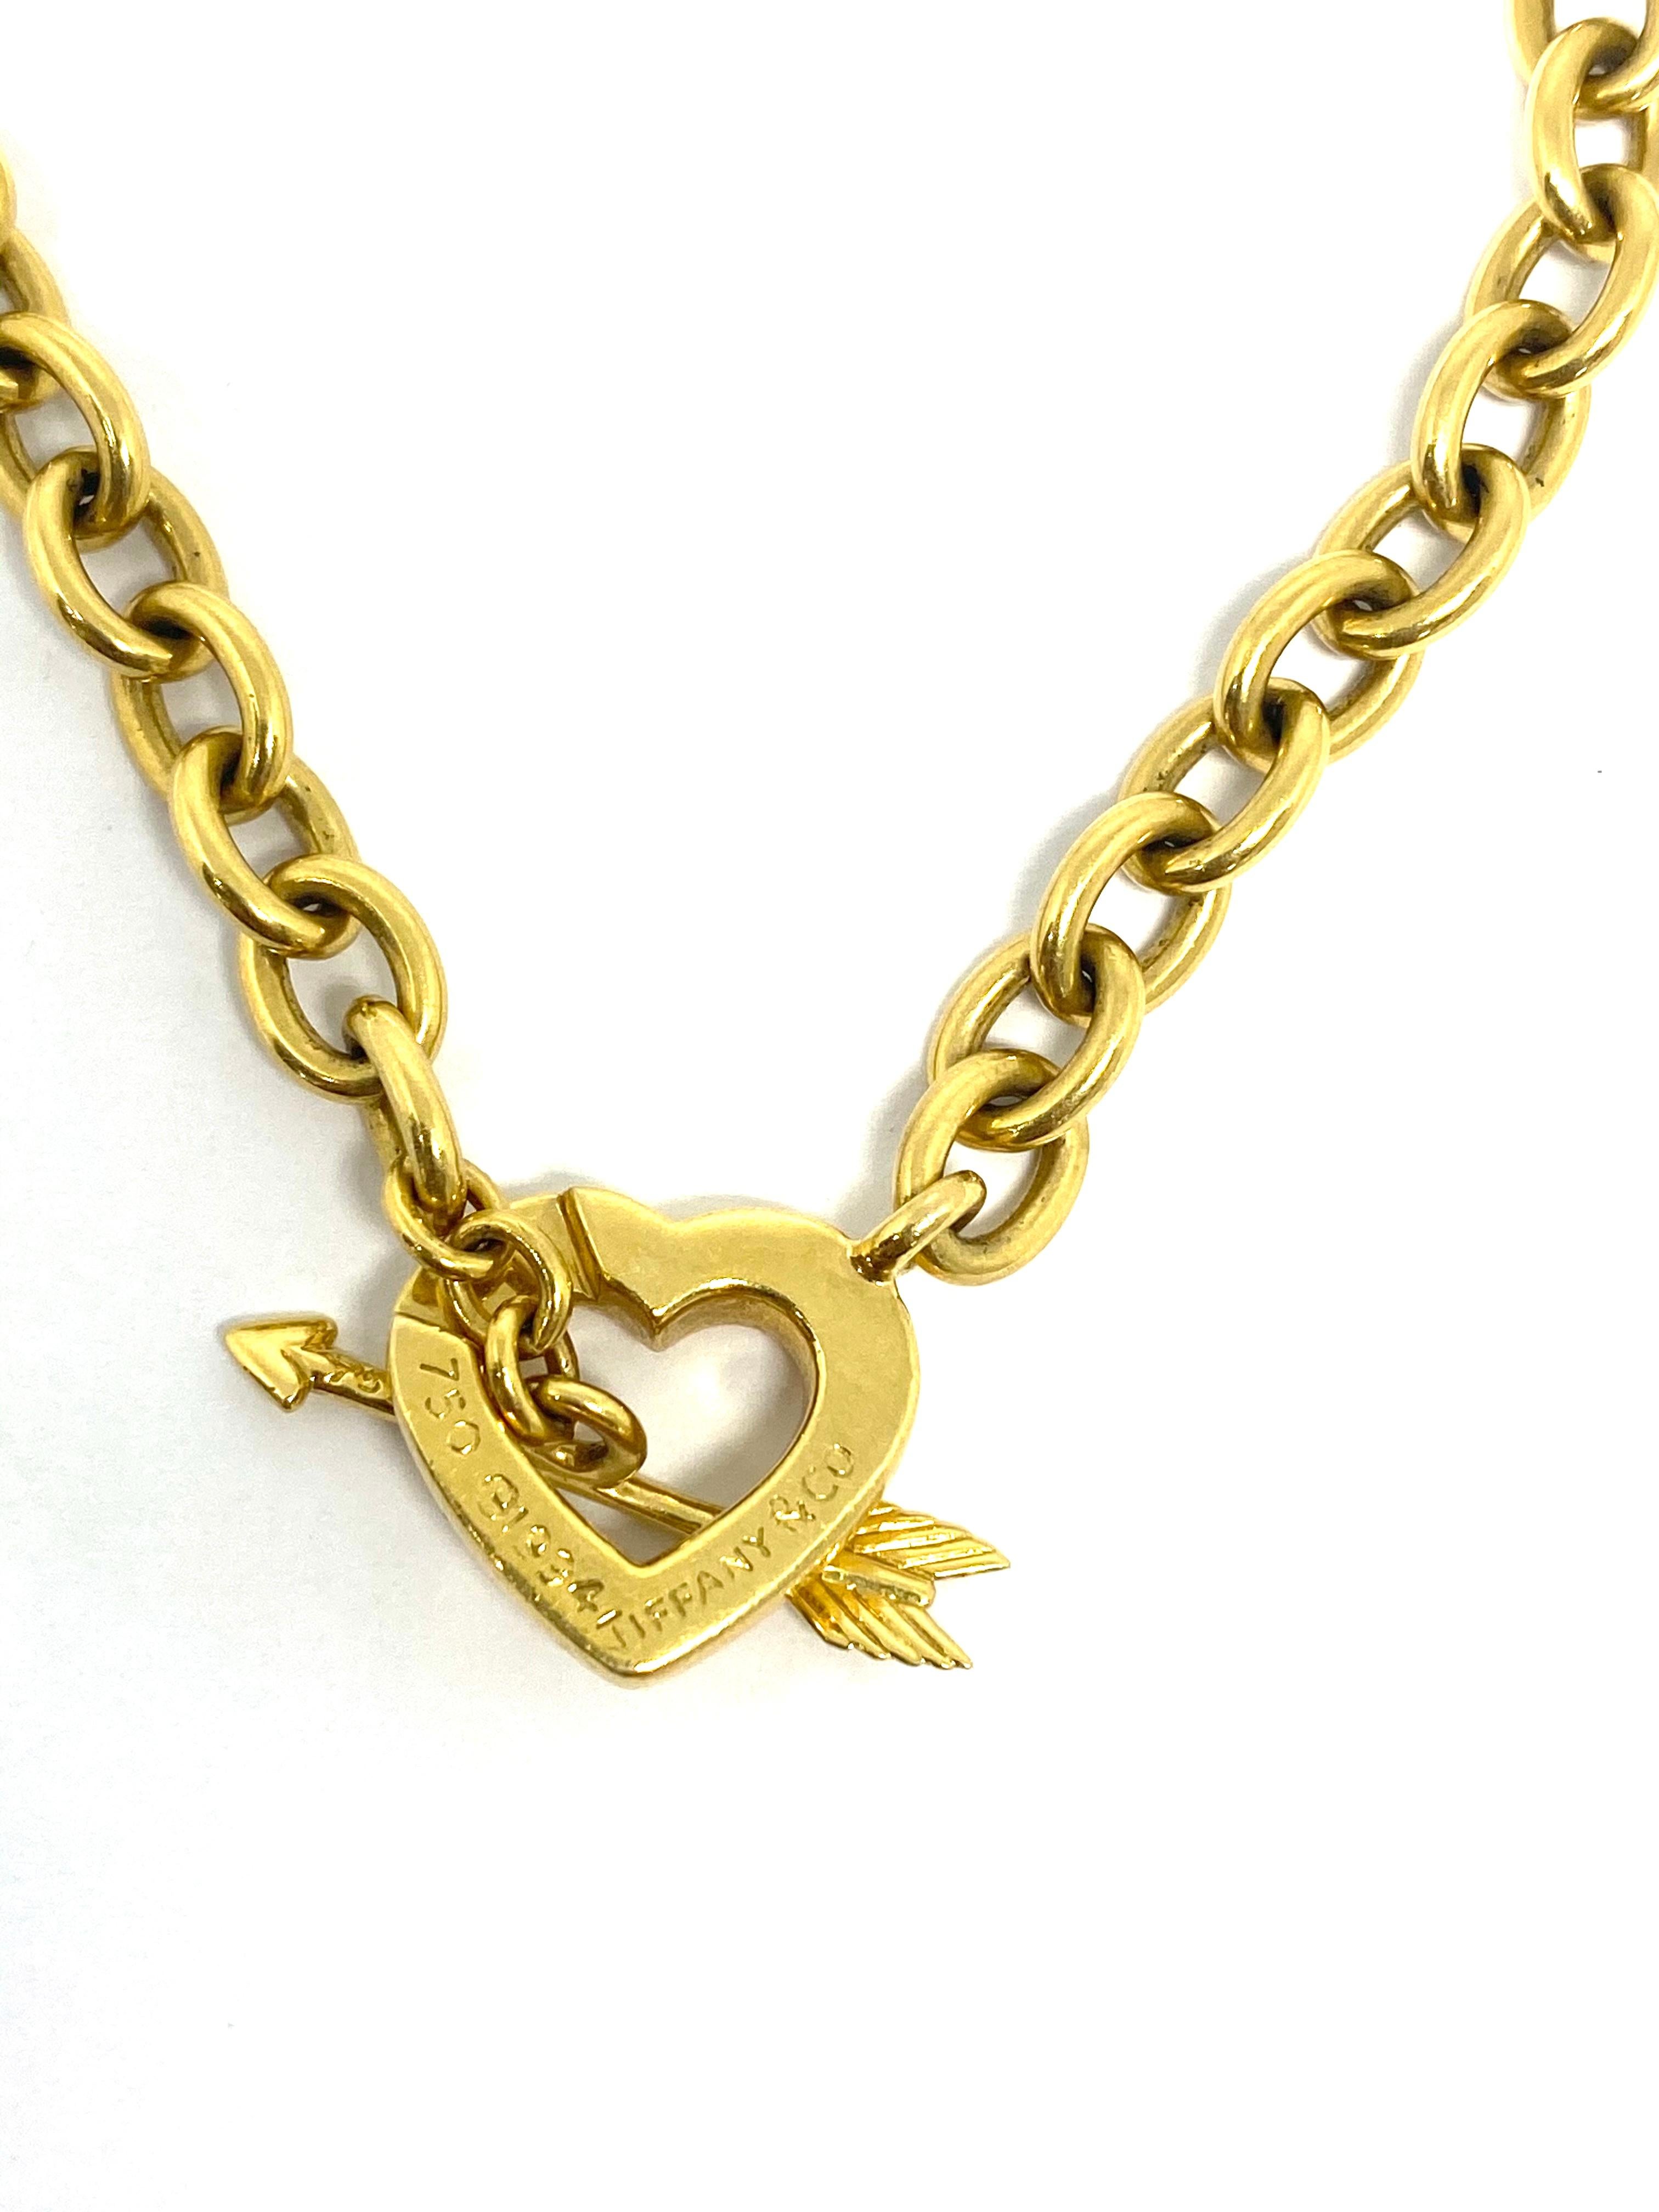 Women's or Men's Vintage Tiffany & Co. Toggle Yellow Gold Heart and Error Link Chain Necklace 